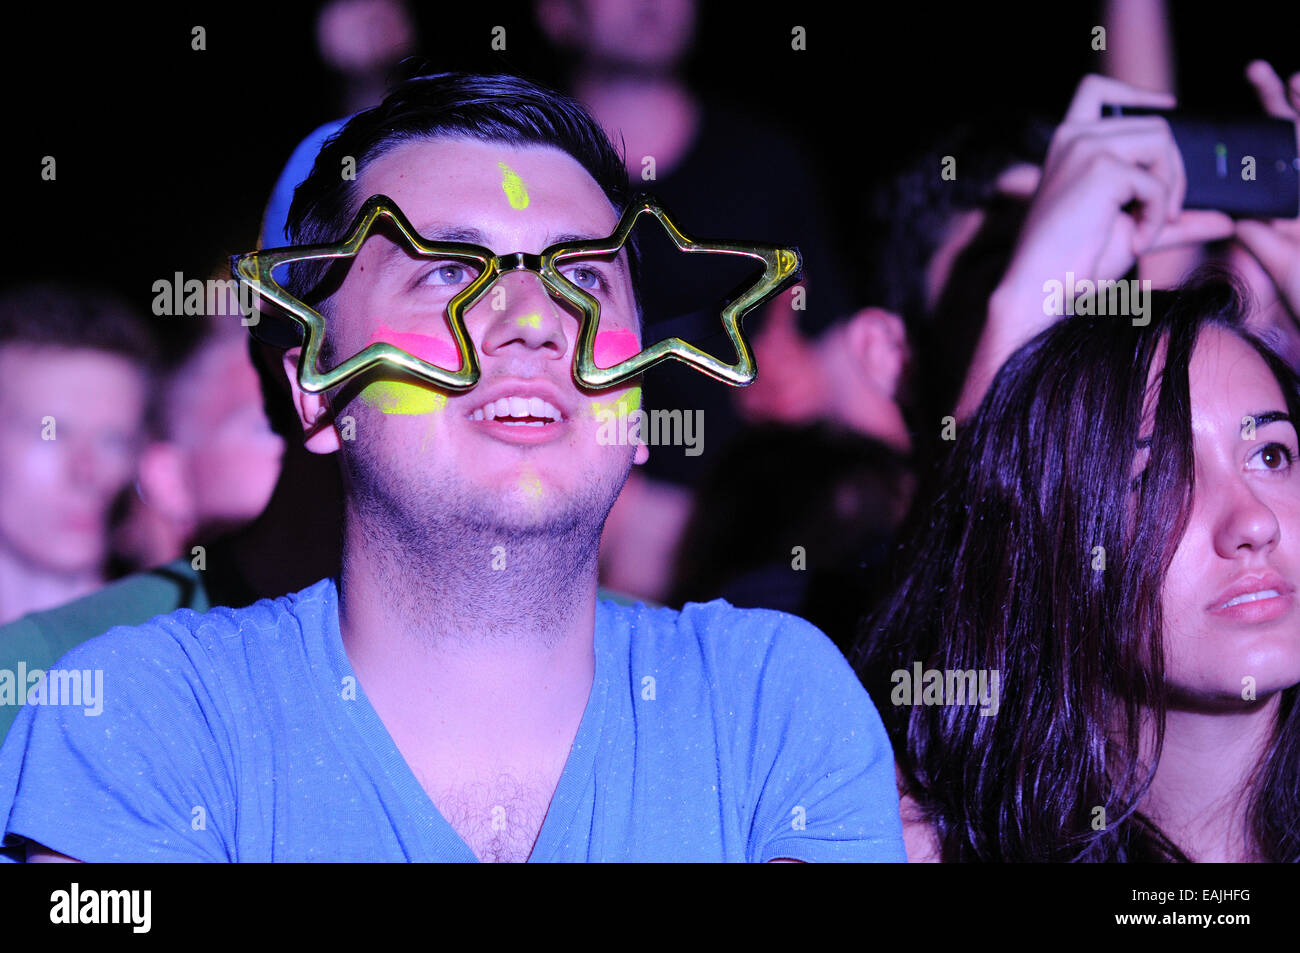 BENICASIM, SPAIN - JULY 18: A boy from the audience with a glasses in star shape at FIB. Stock Photo